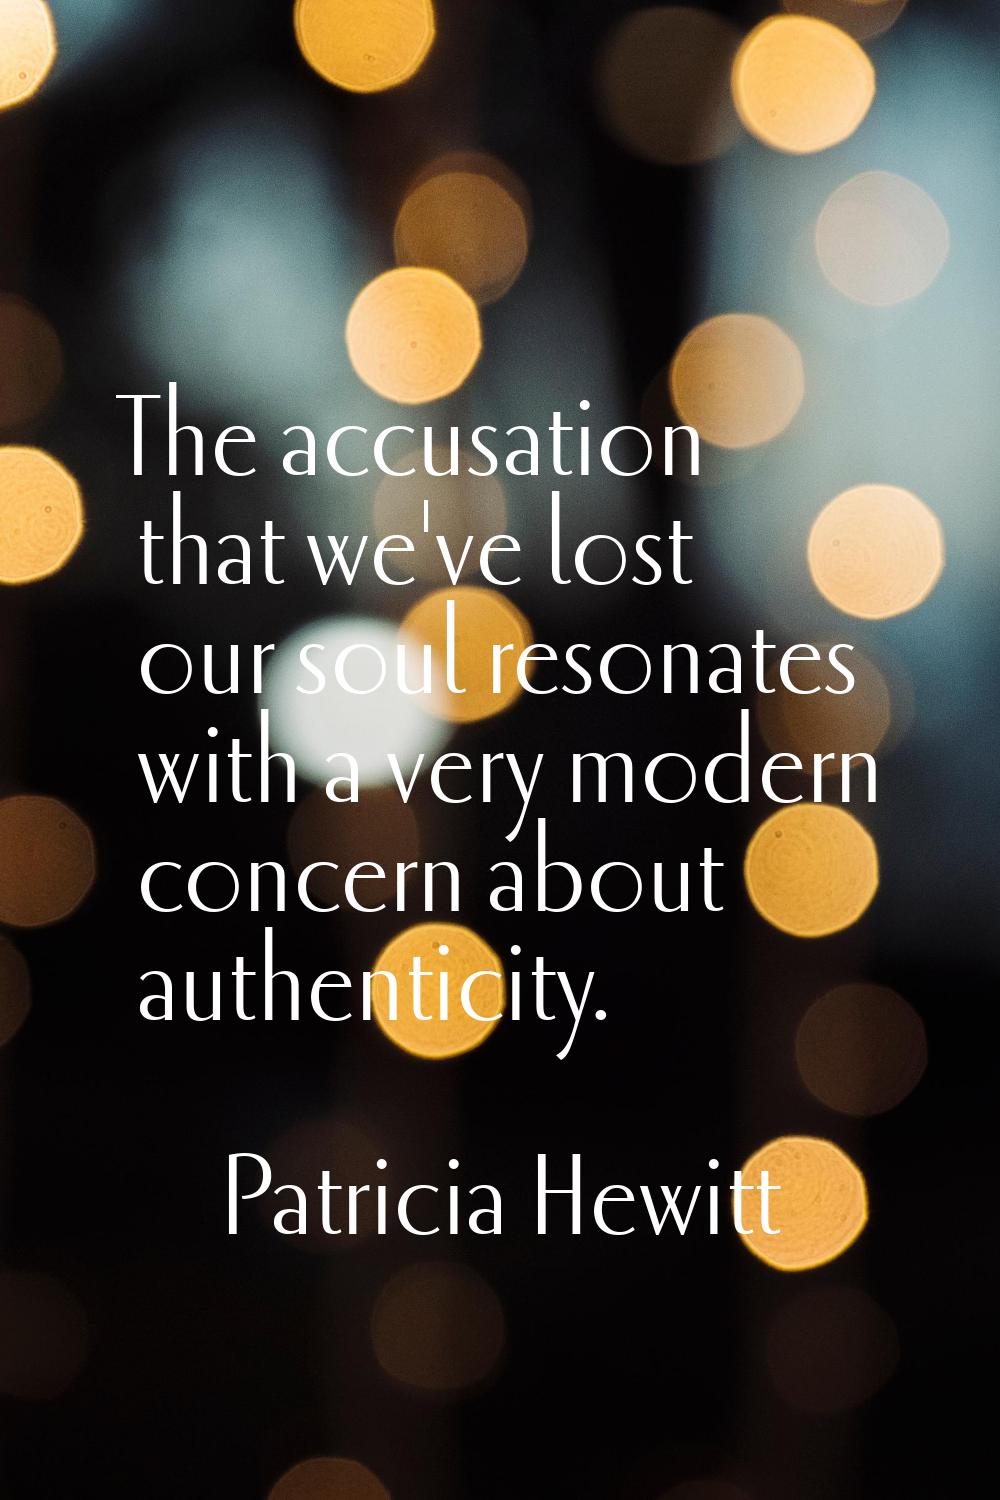 The accusation that we've lost our soul resonates with a very modern concern about authenticity.